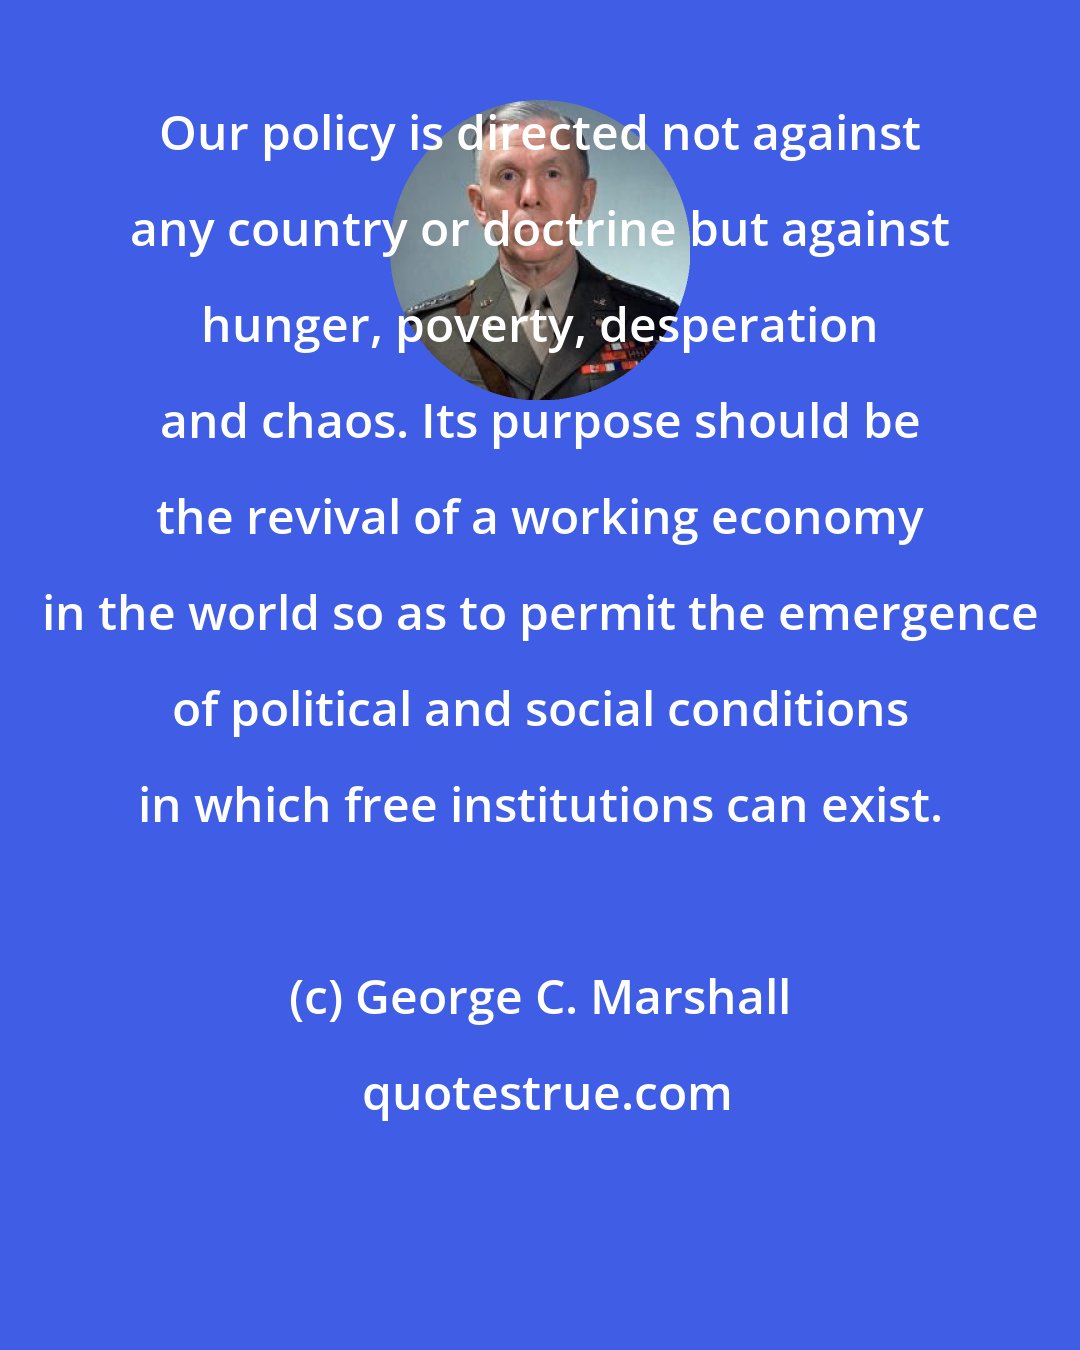 George C. Marshall: Our policy is directed not against any country or doctrine but against hunger, poverty, desperation and chaos. Its purpose should be the revival of a working economy in the world so as to permit the emergence of political and social conditions in which free institutions can exist.